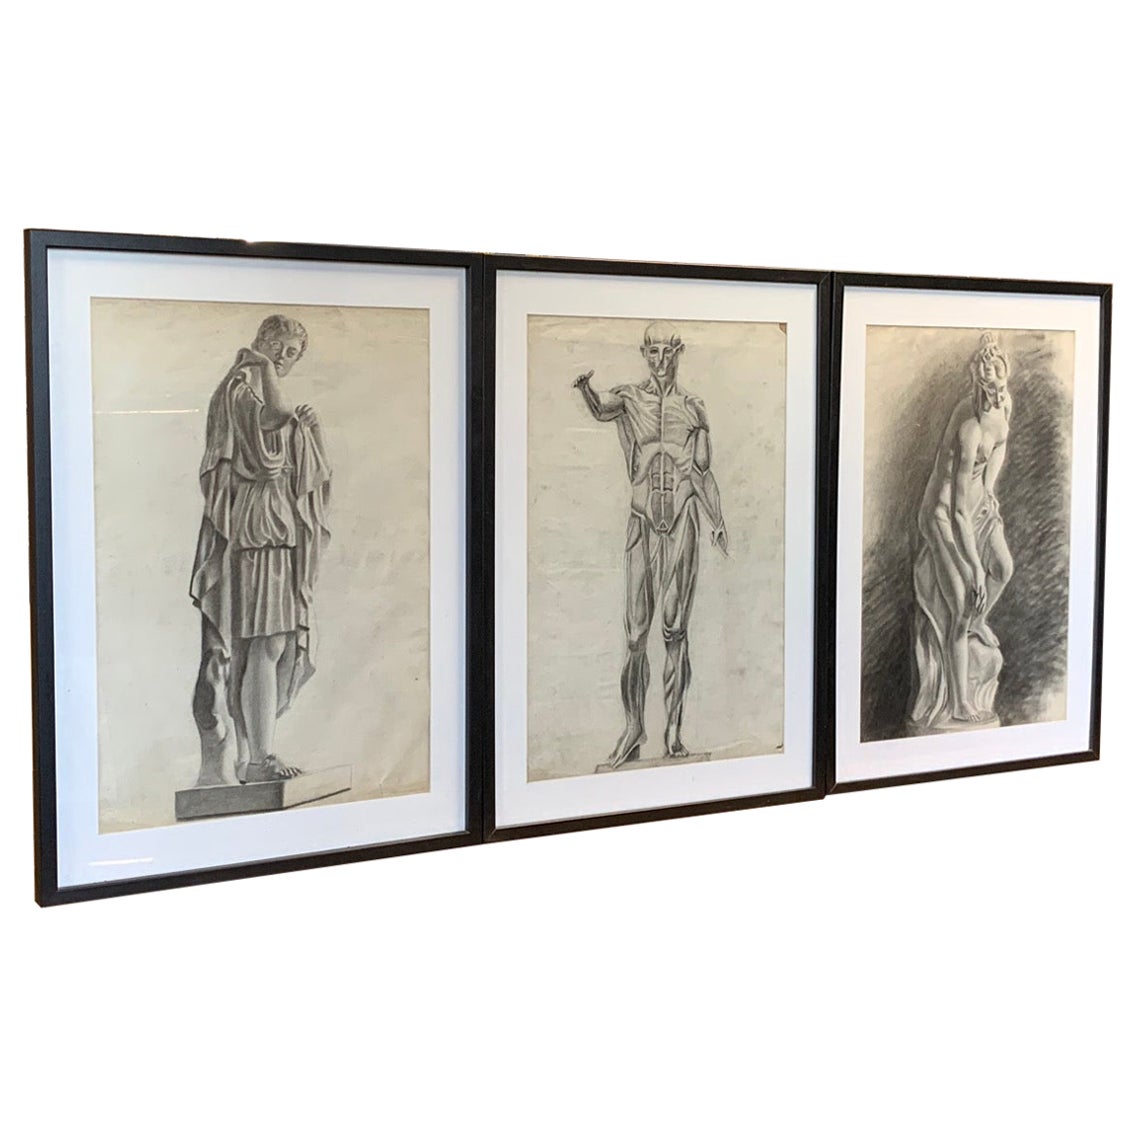 Set of 3 x 19th Century Charcoal Drawings